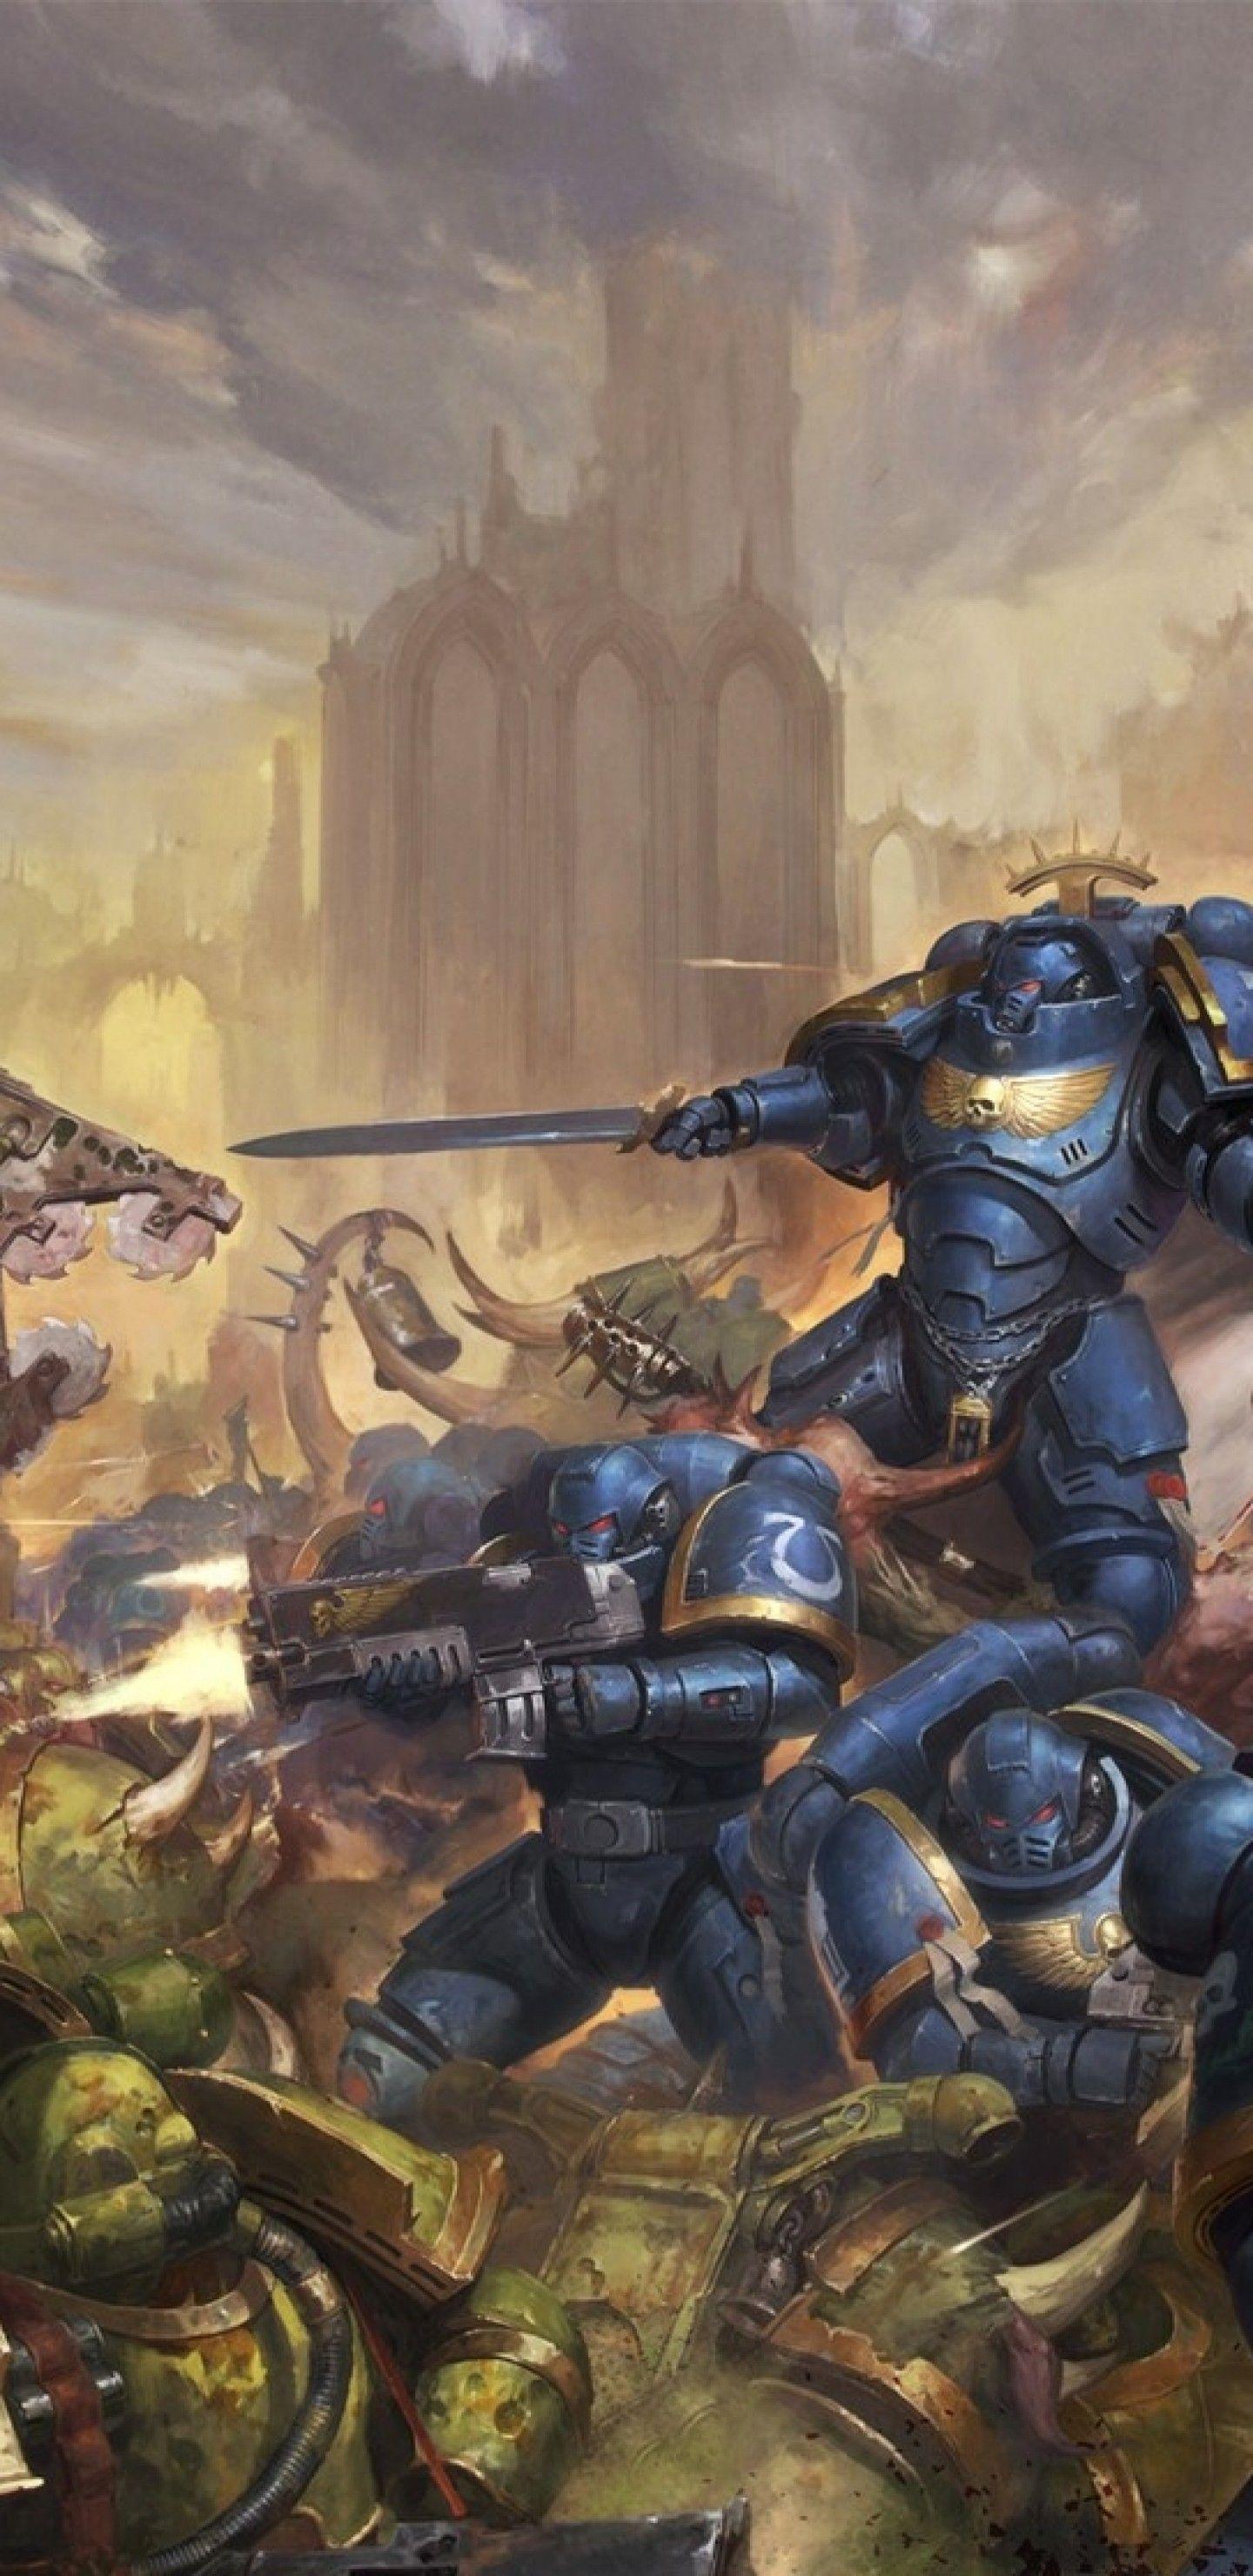 Download wallpapers Warhammer 40 000 Ultramarines WH40K Warhammer  characters main characters Warhammer 40K for desktop with resolution  2880x1800 High Quality HD pictures wallpapers